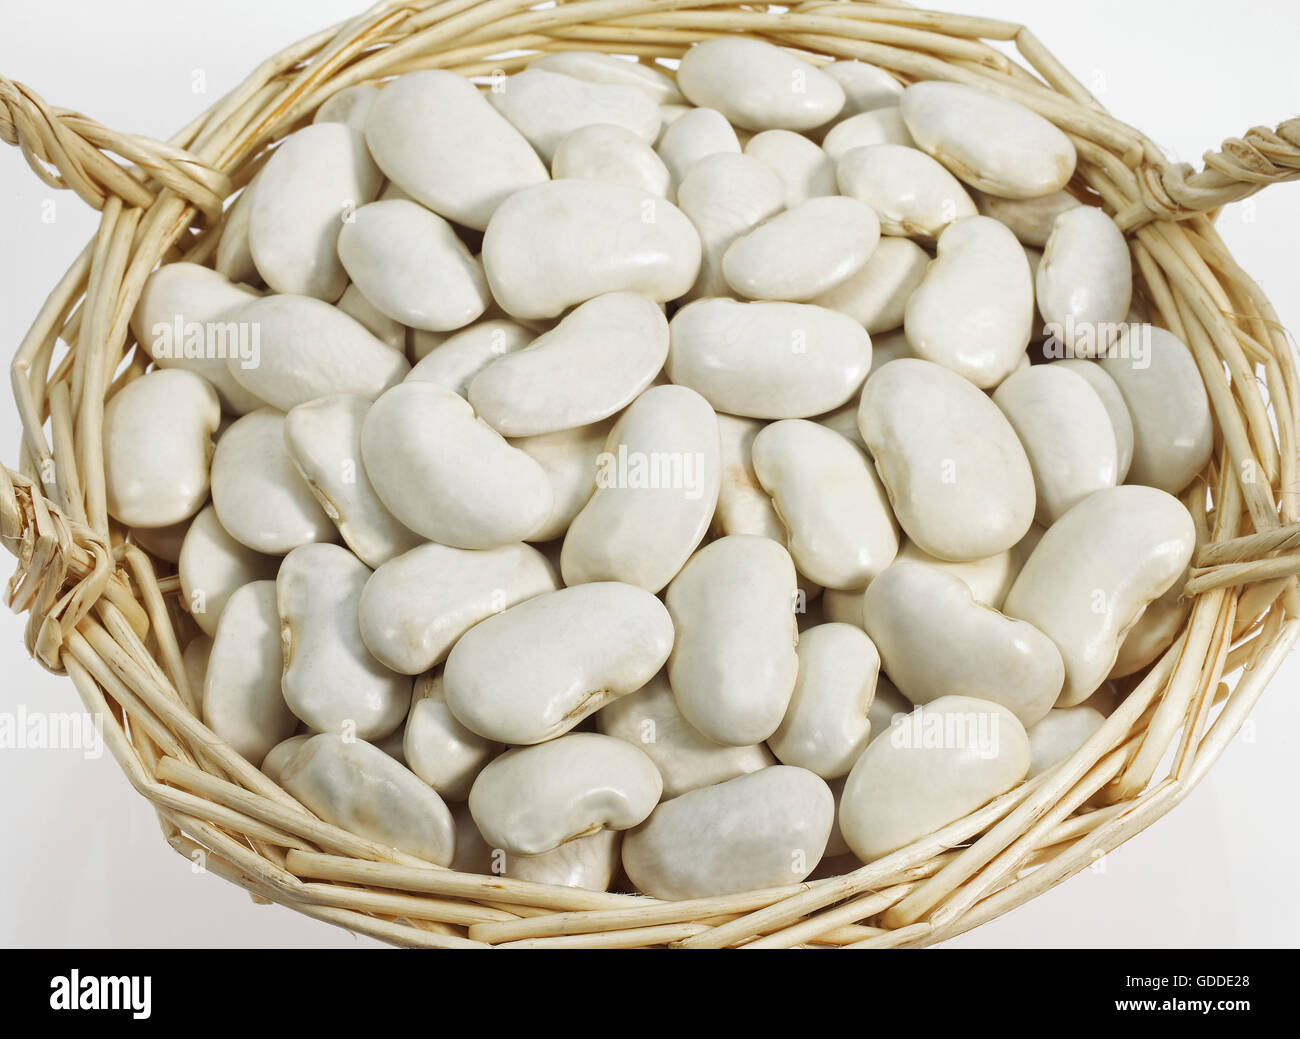 French Beans called Soissons Beans, phaseolus vulgaris against White  Background Stock Photo - Alamy